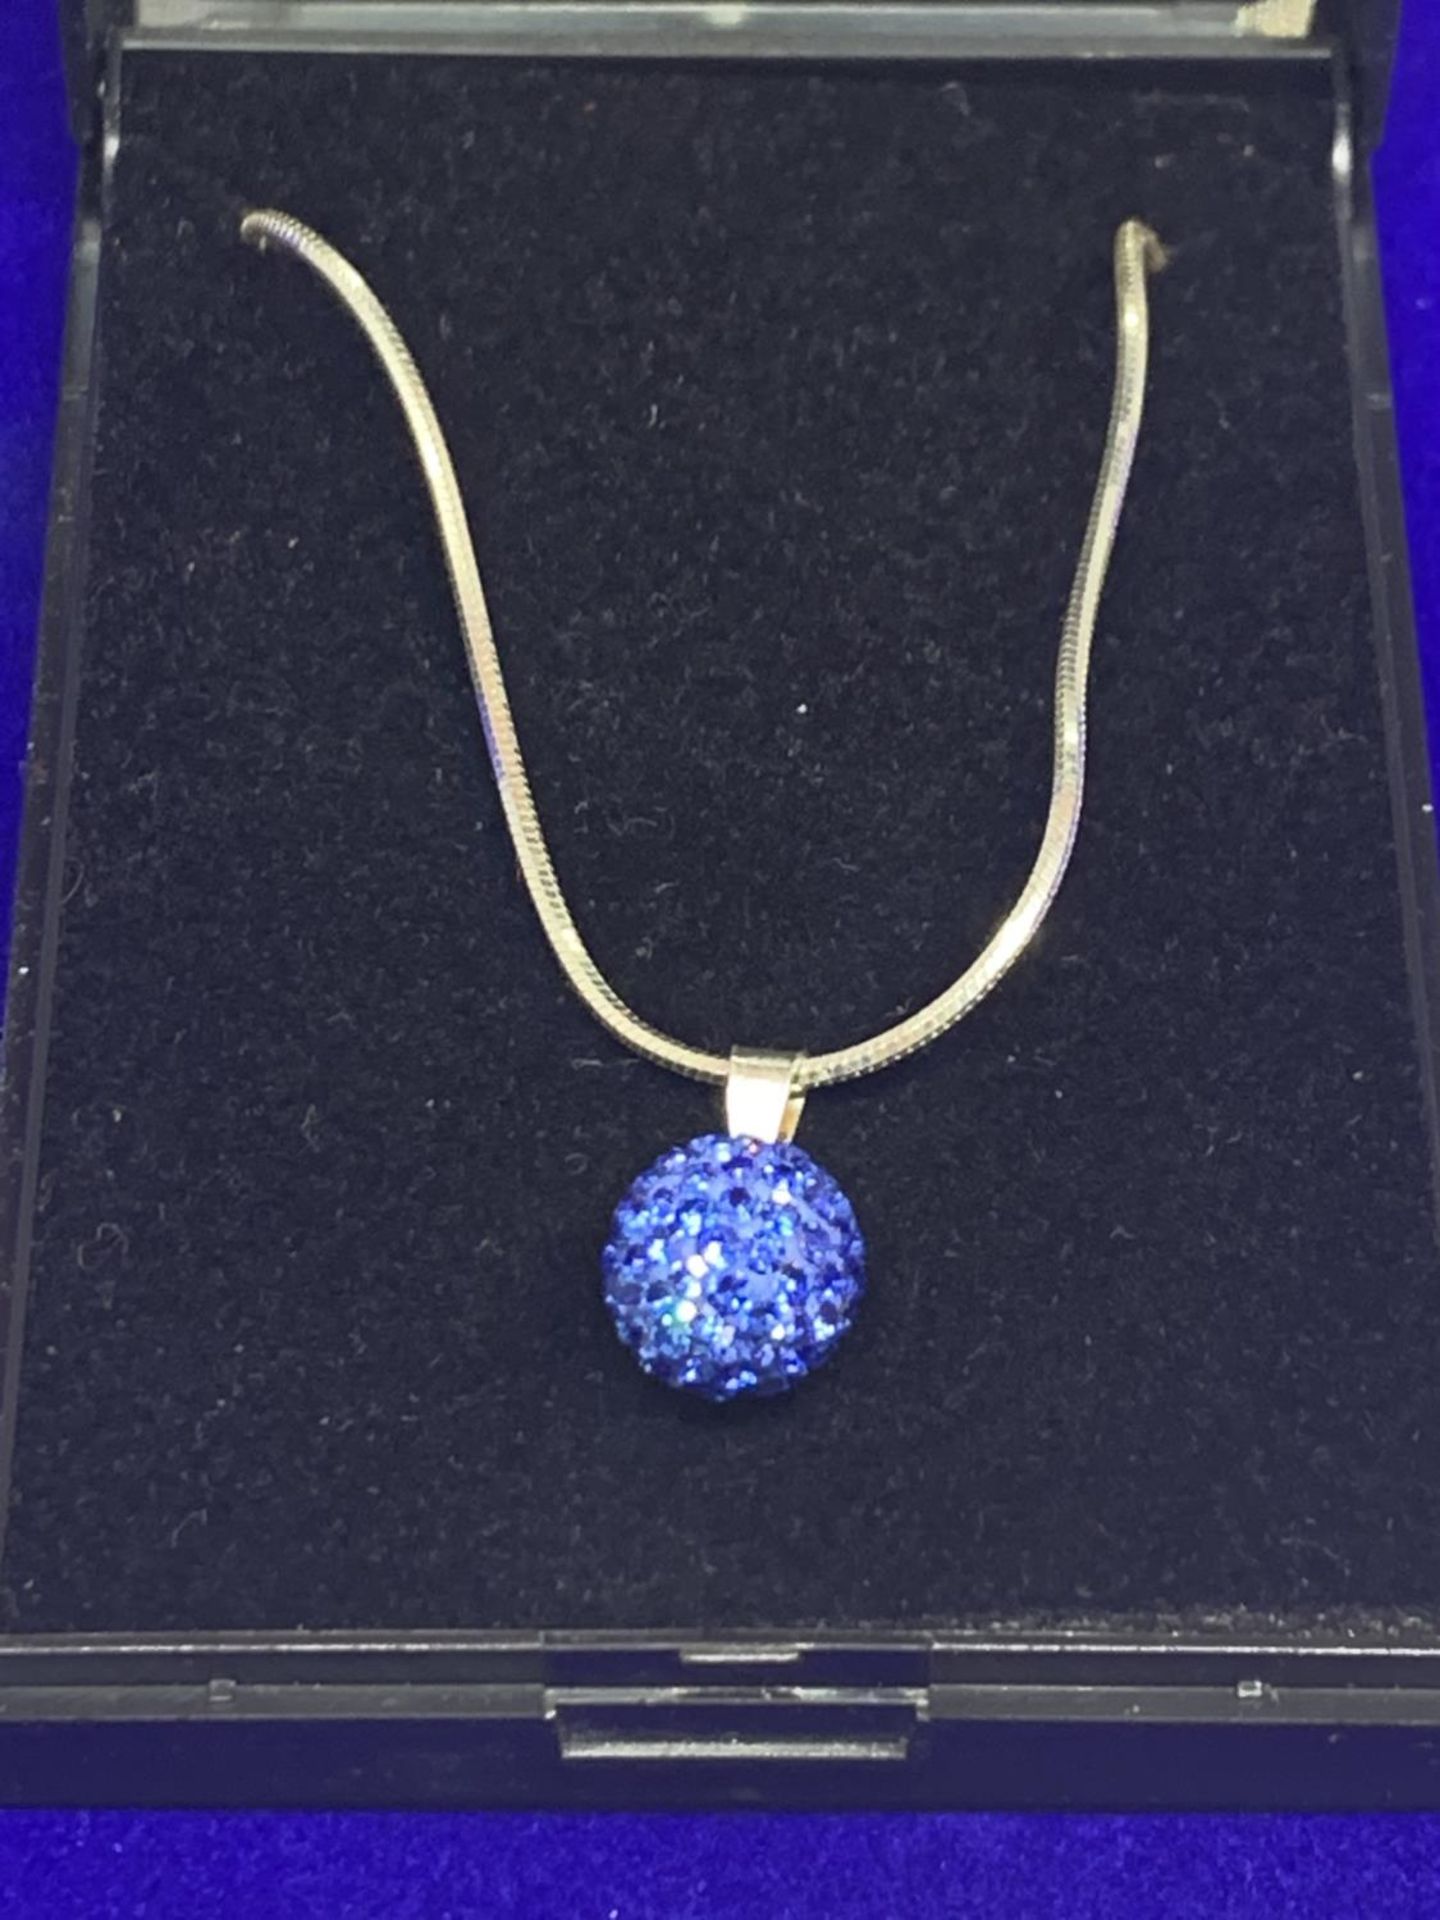 A SILVER CHAIN MARKED 925 WITH A BLUE CRYSTAL BALL PENDANT IN A PRESENTATION BOX - Image 3 of 3